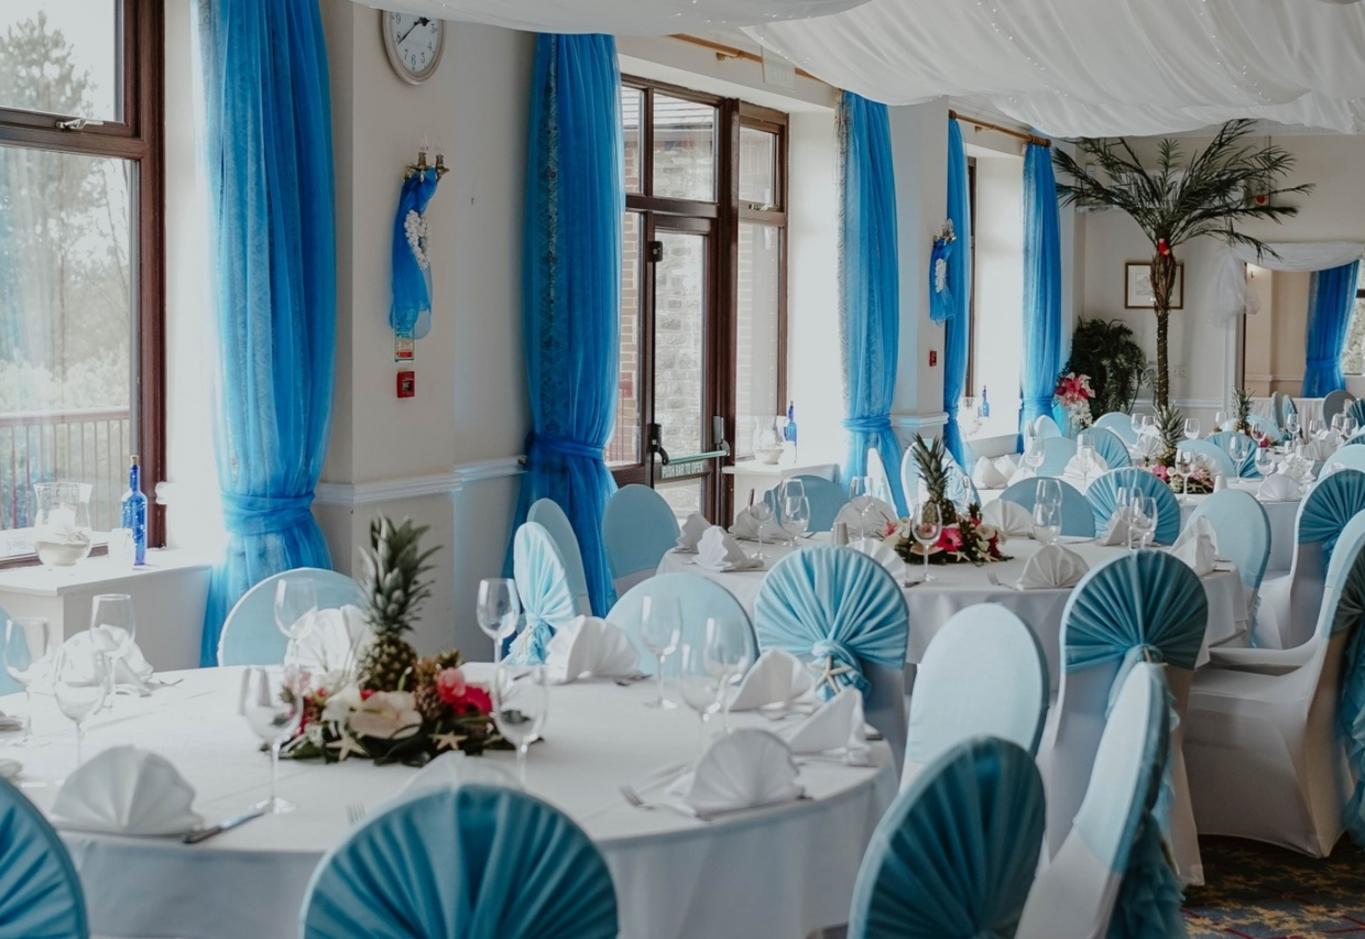 Wrag Barn Golf and Country Club wedding venue Highworth Swindon Wiltshire fully licensed for civil ceremonies sea blue ruffled chair sashes by The Event Dreser Joanna Brooks Photography